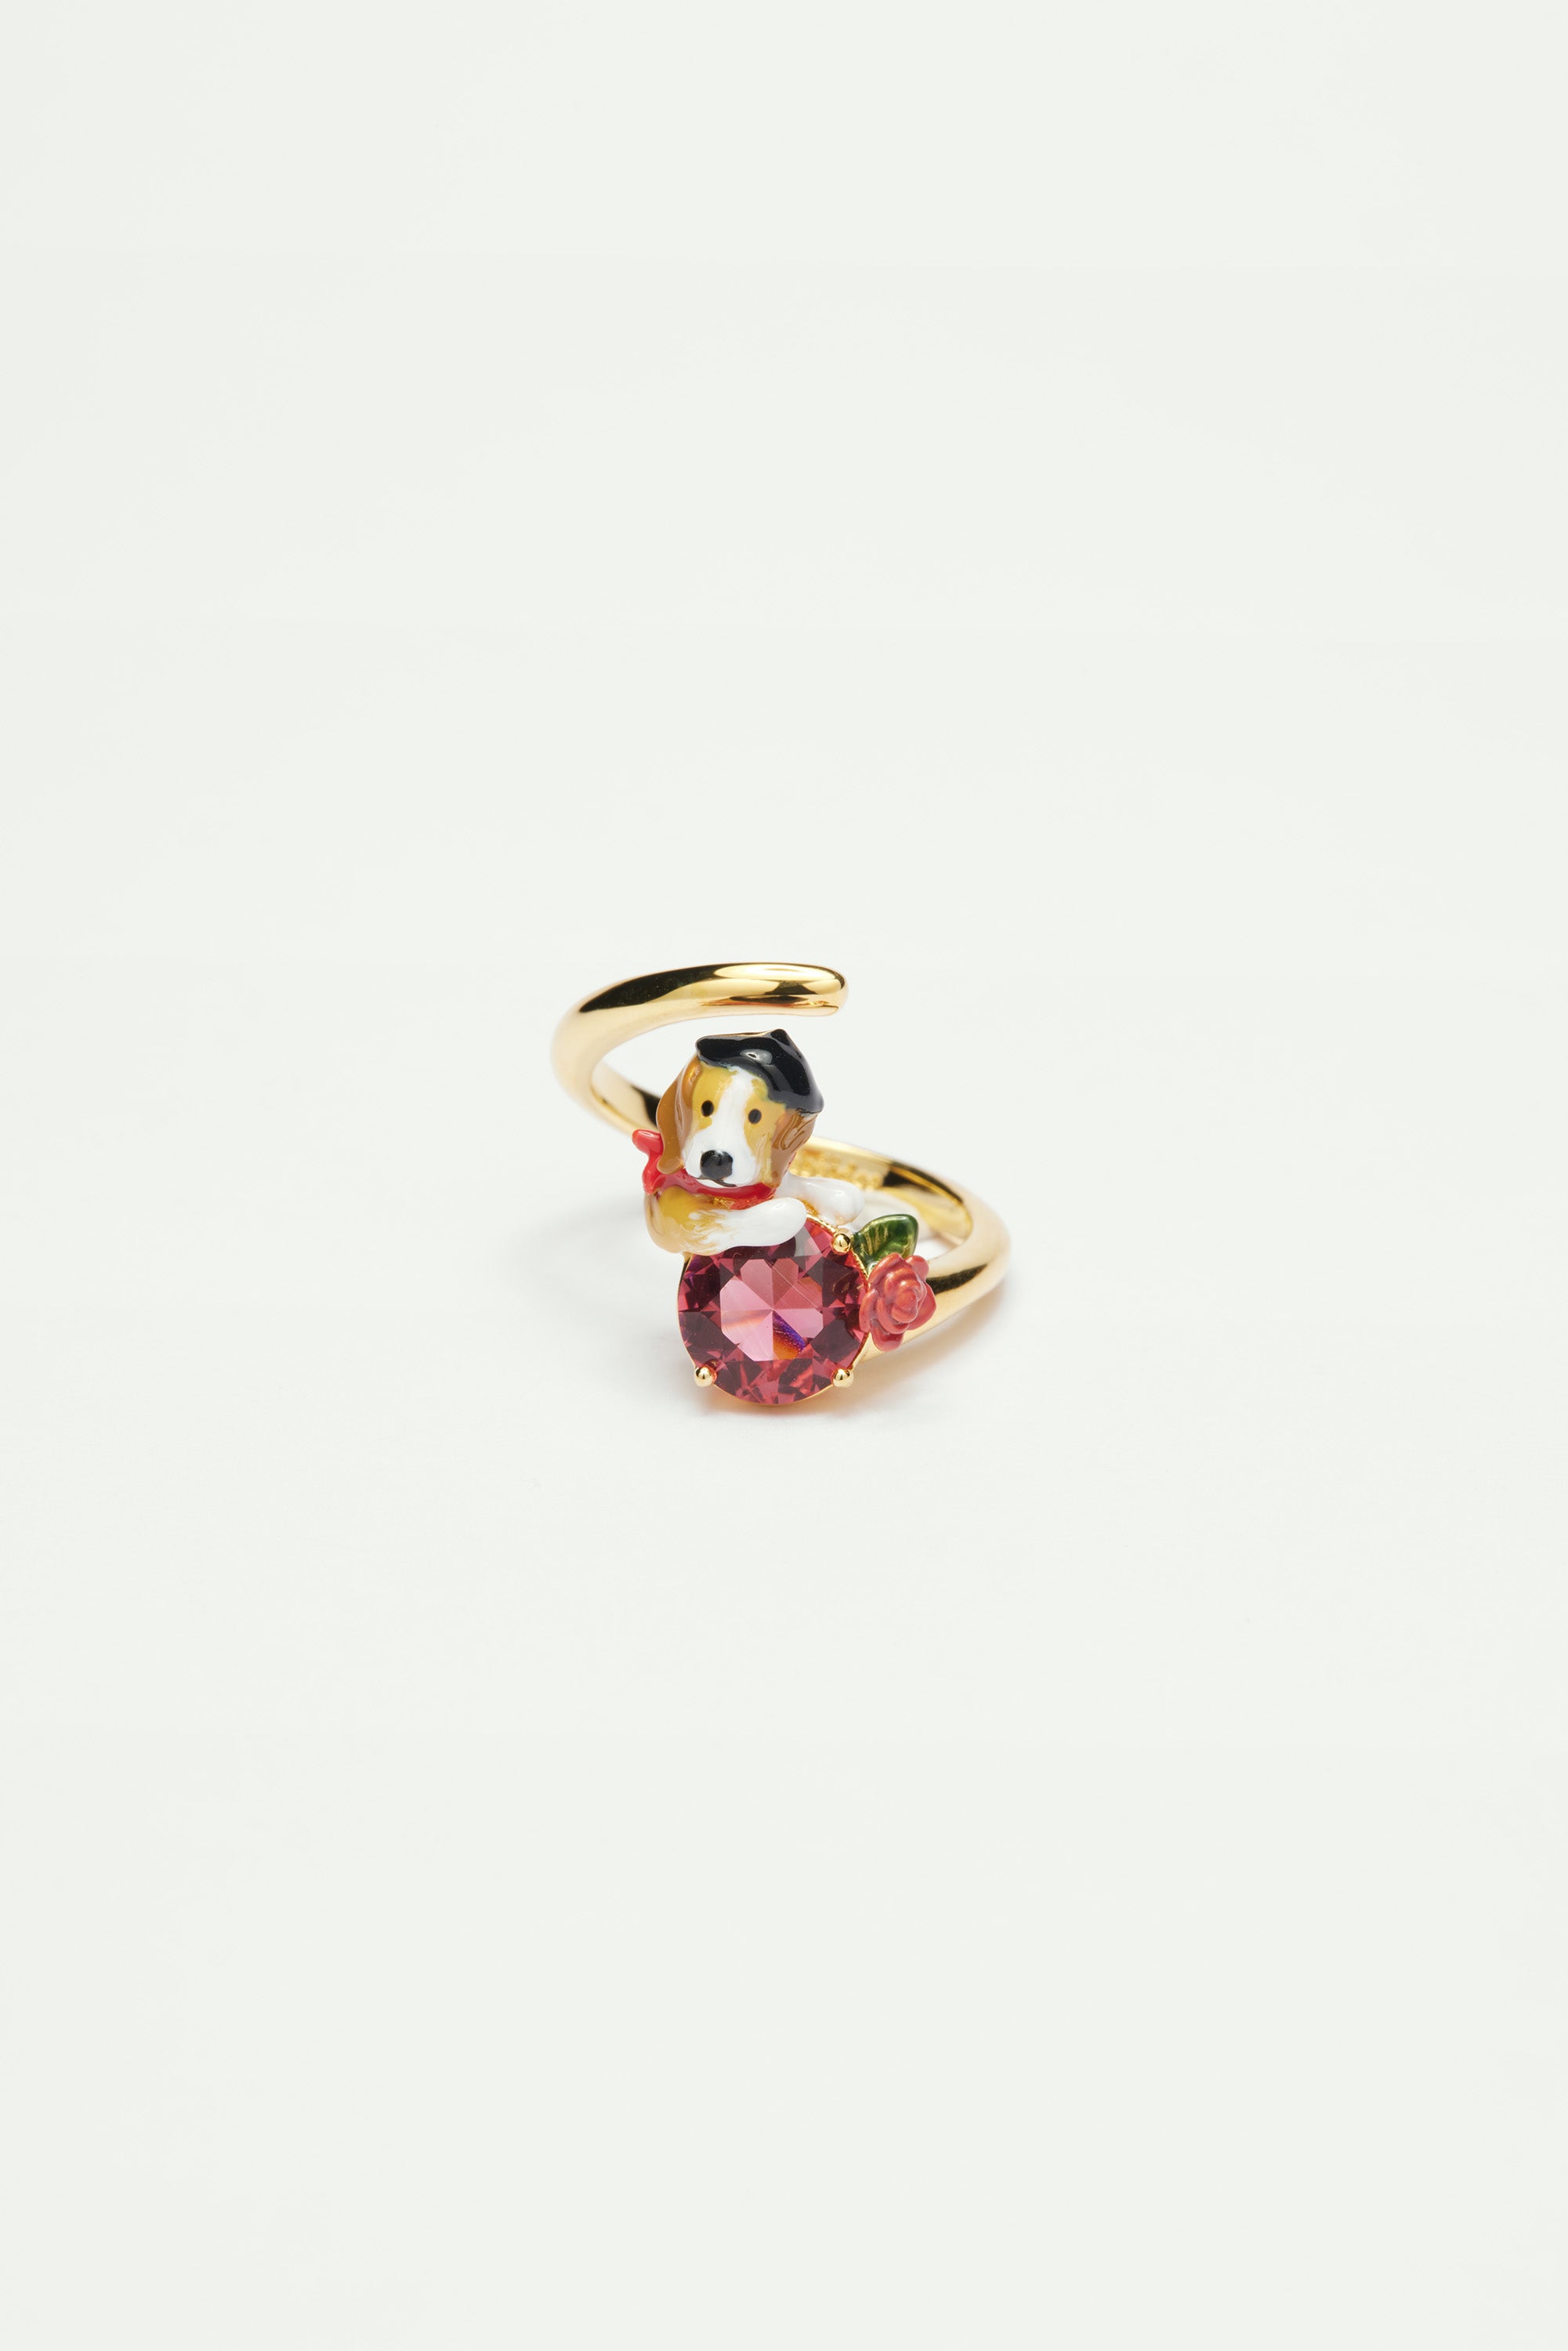 Beagle and pink cut glass stone adjustable ring